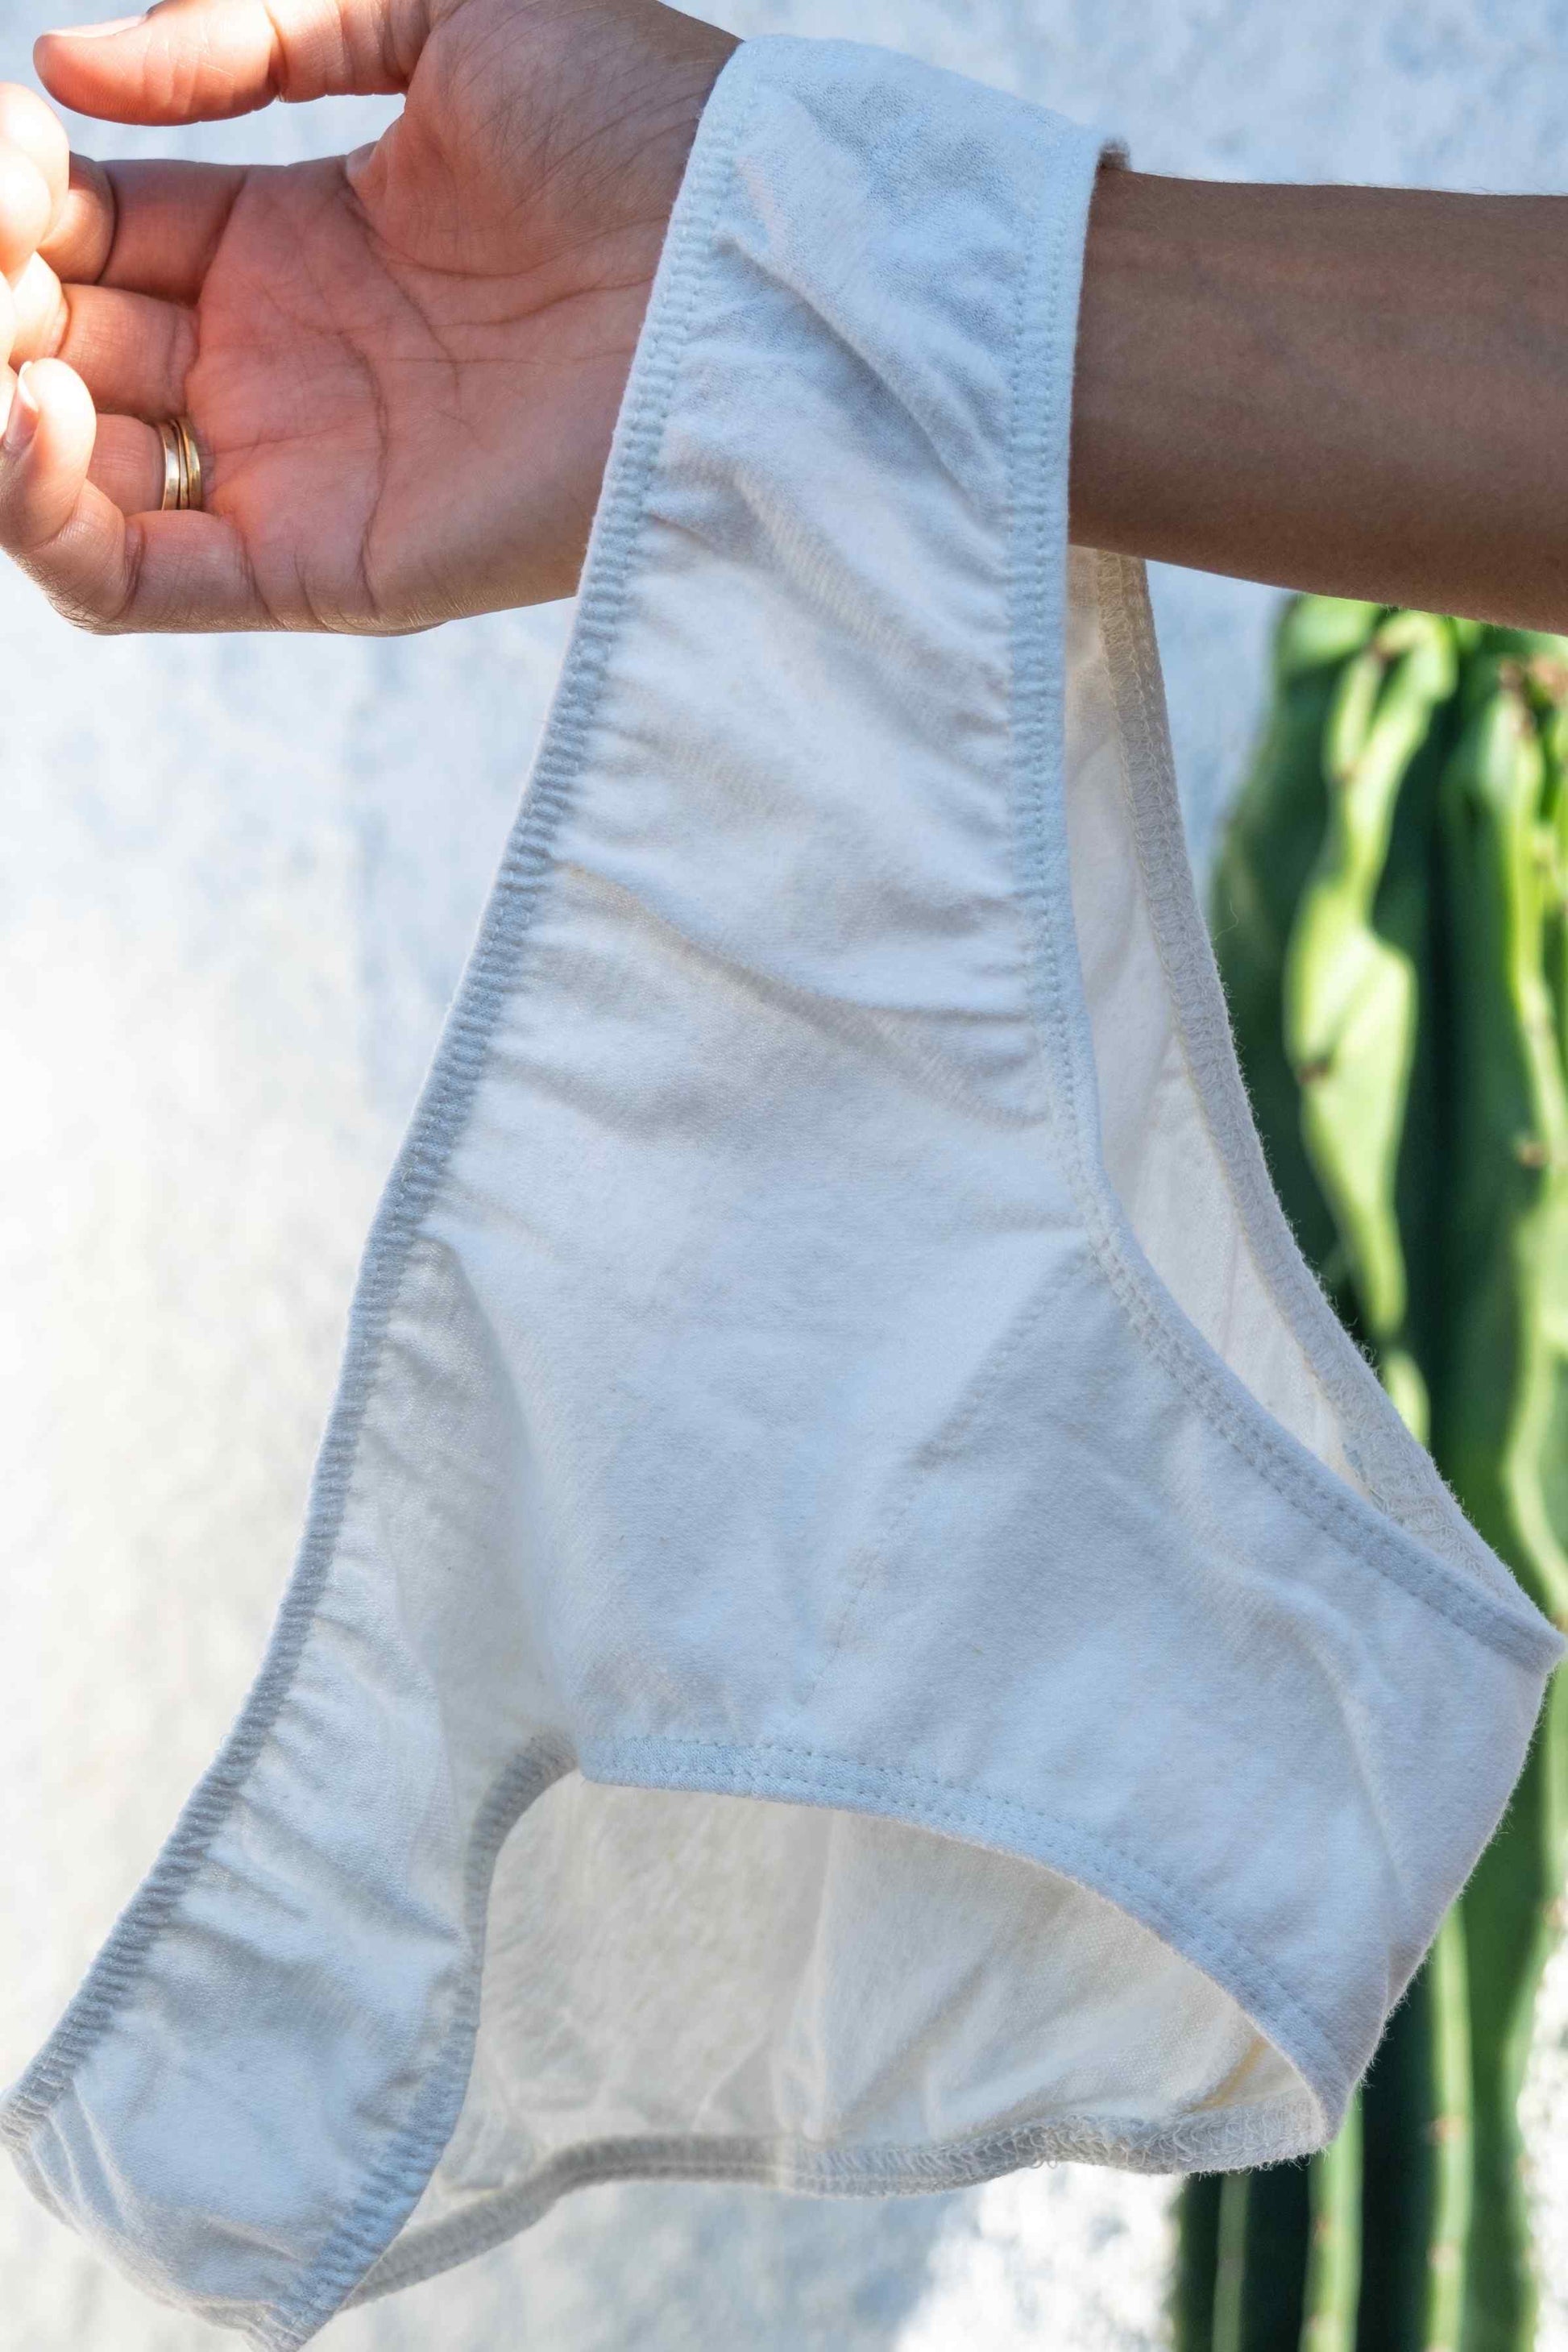 Top 10 benefits of hemp undergarments to your body and surrounding